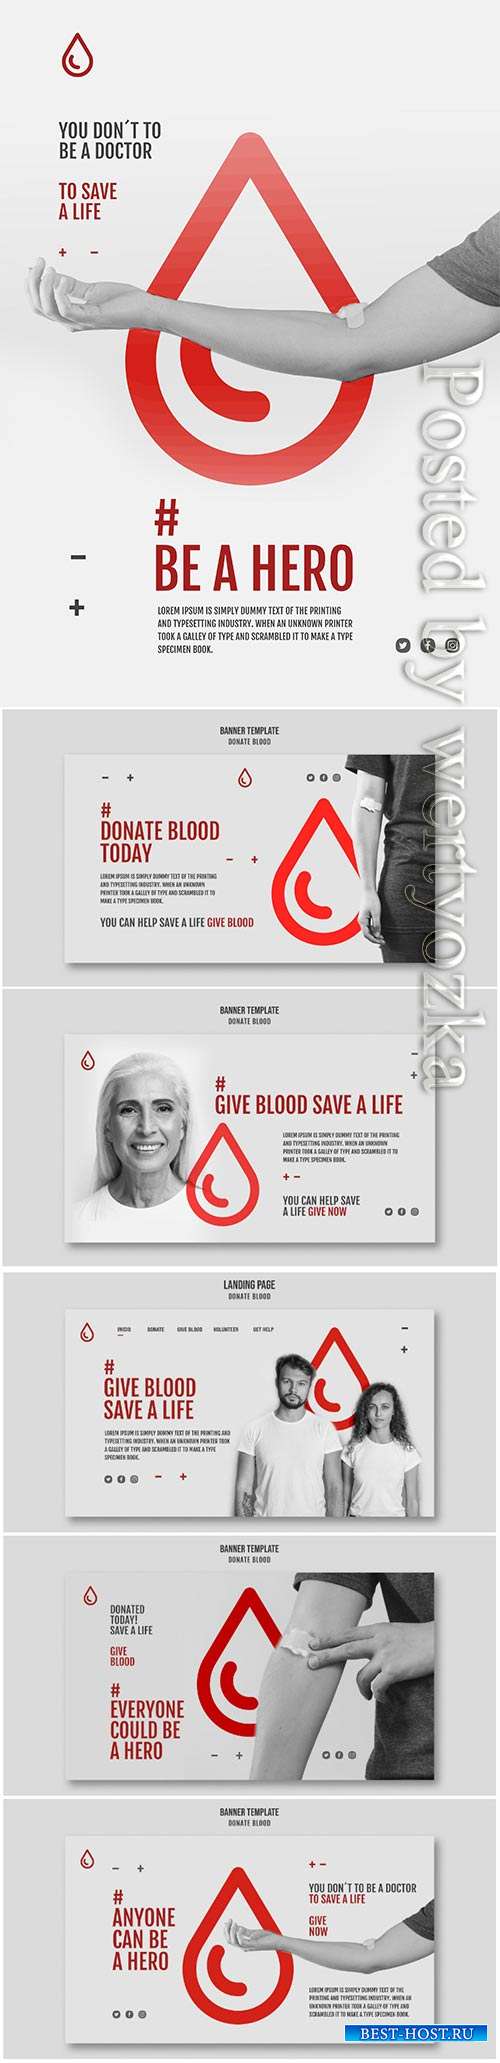 Donate blood campaign banner style